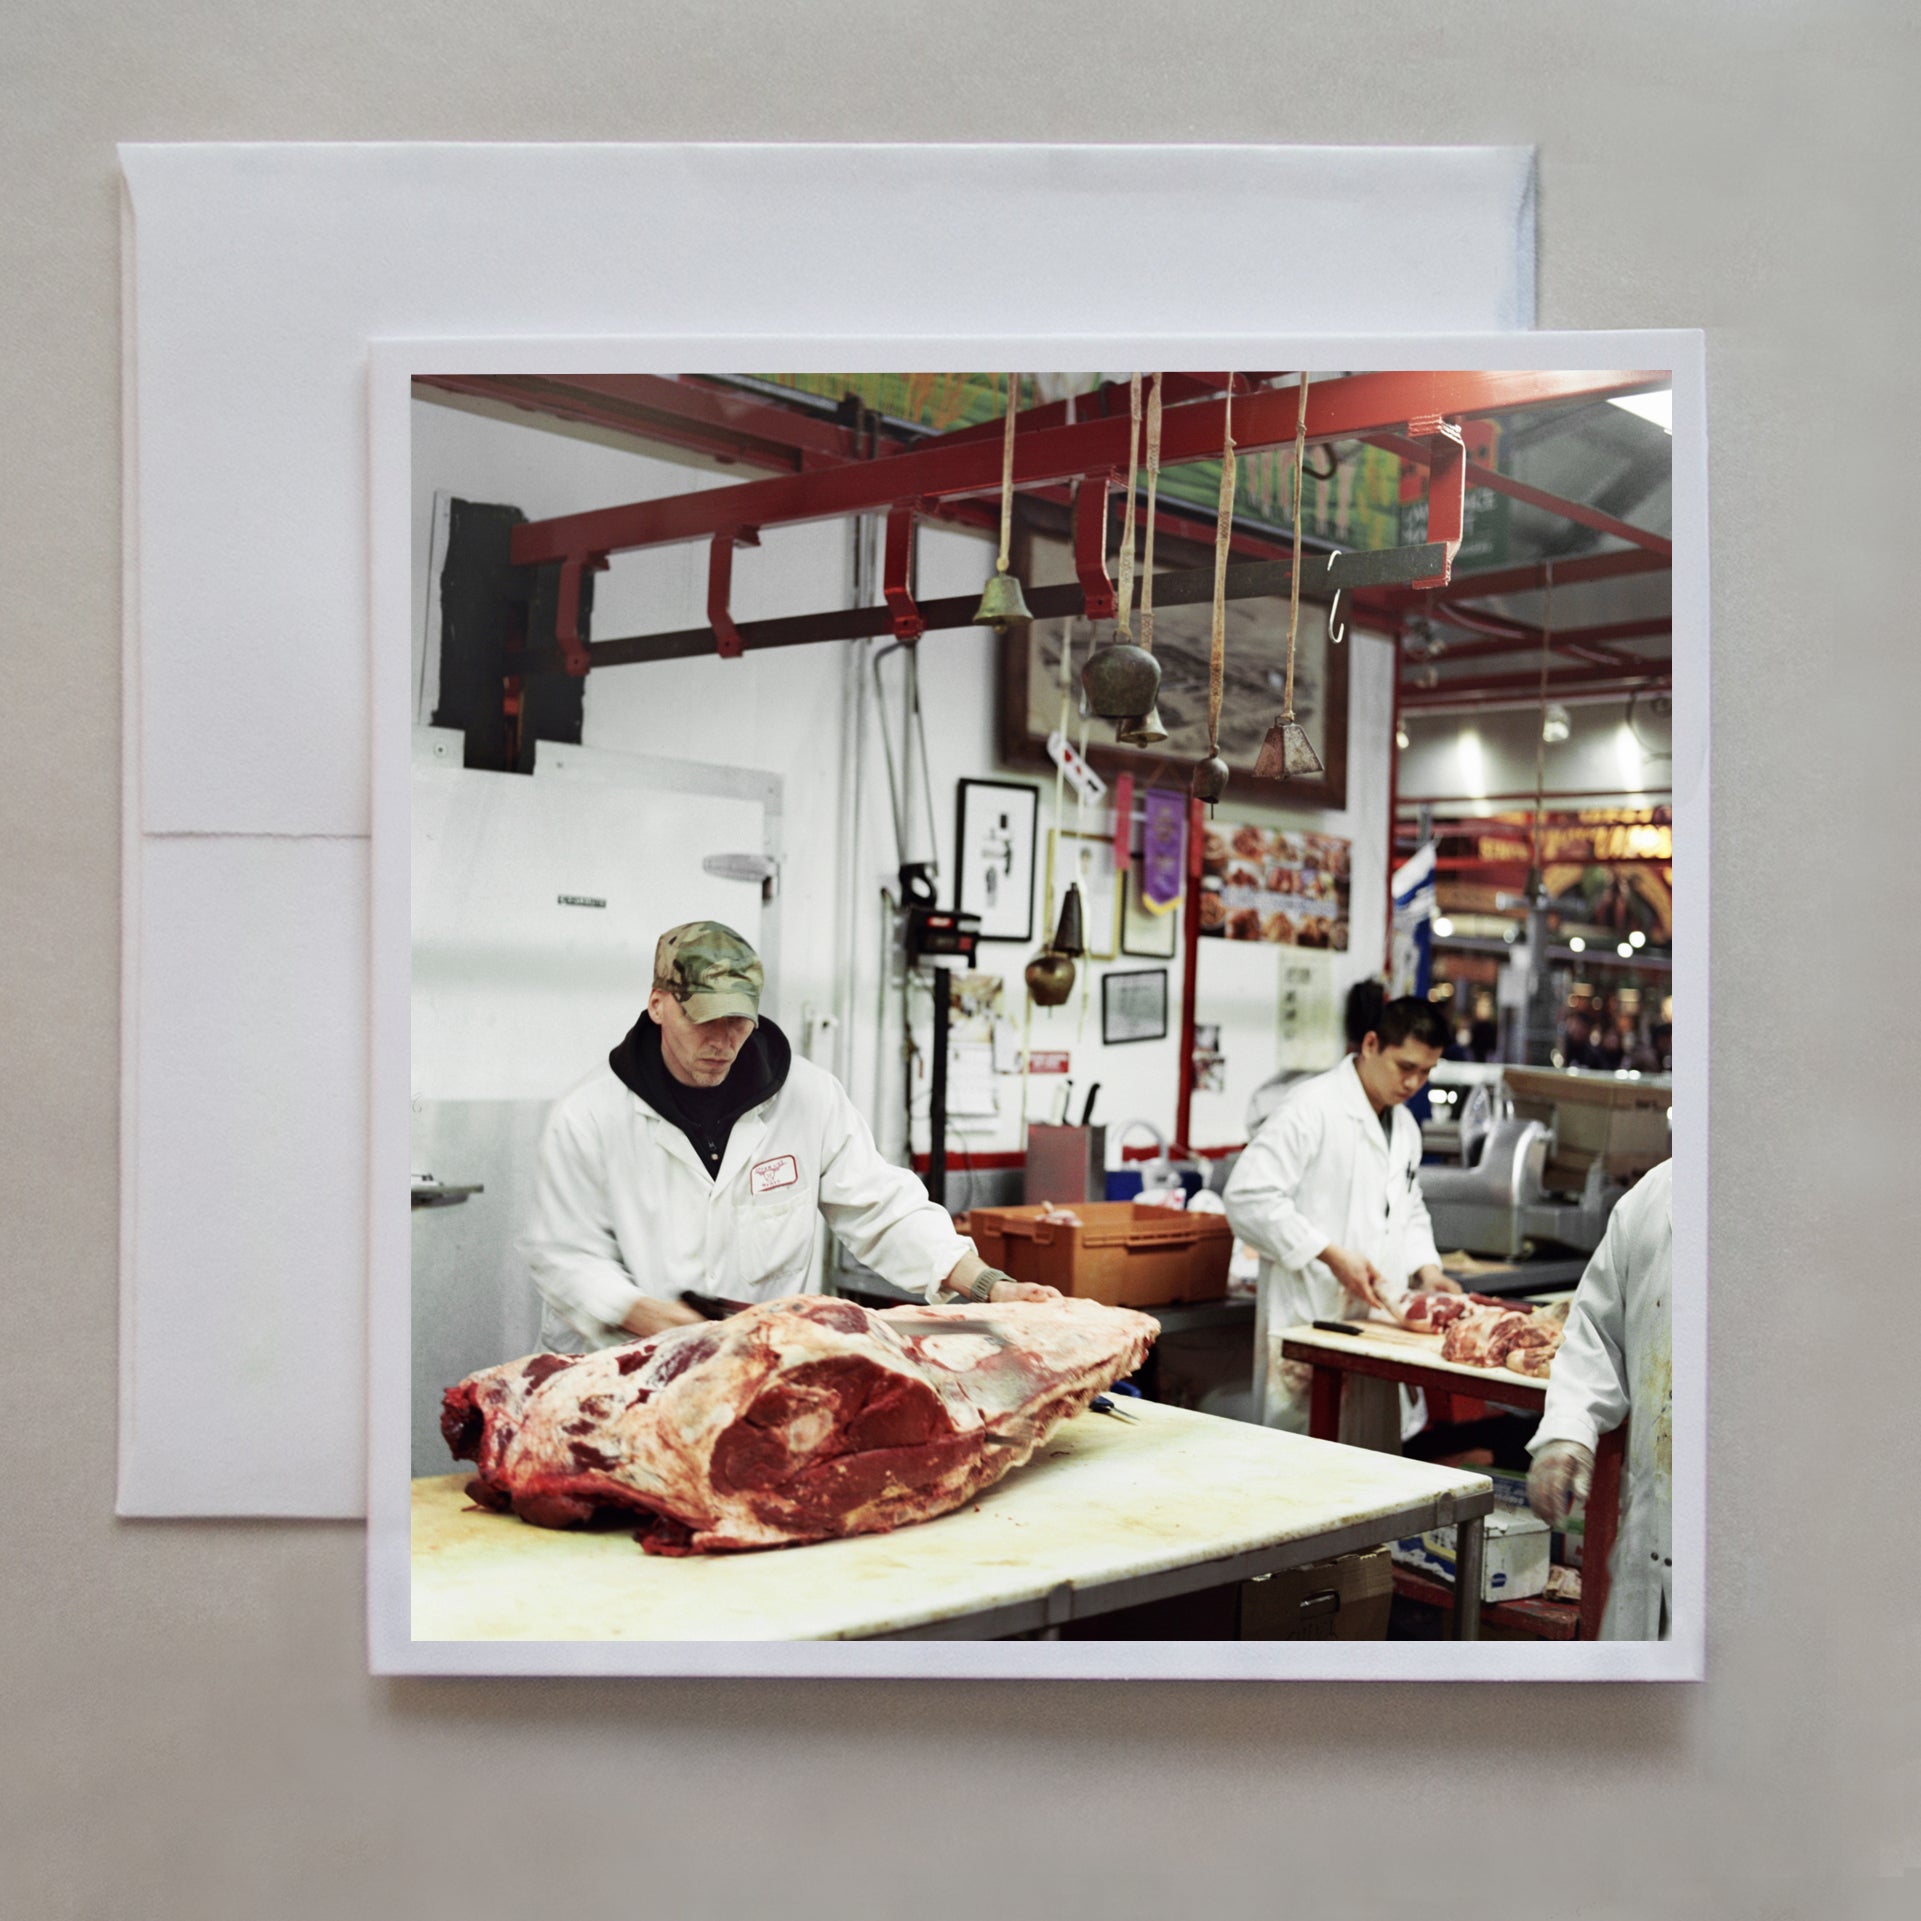 A favourite family activity (pre-Covid) was shopping on Saturday morning at the St. Lawrence Market in Toronto, often for a dinner party we might be hosting that weekend. This 6x6 film photograph shows the Upper Cuts Meat butcher working on steaks by photographer Caley Taylor.